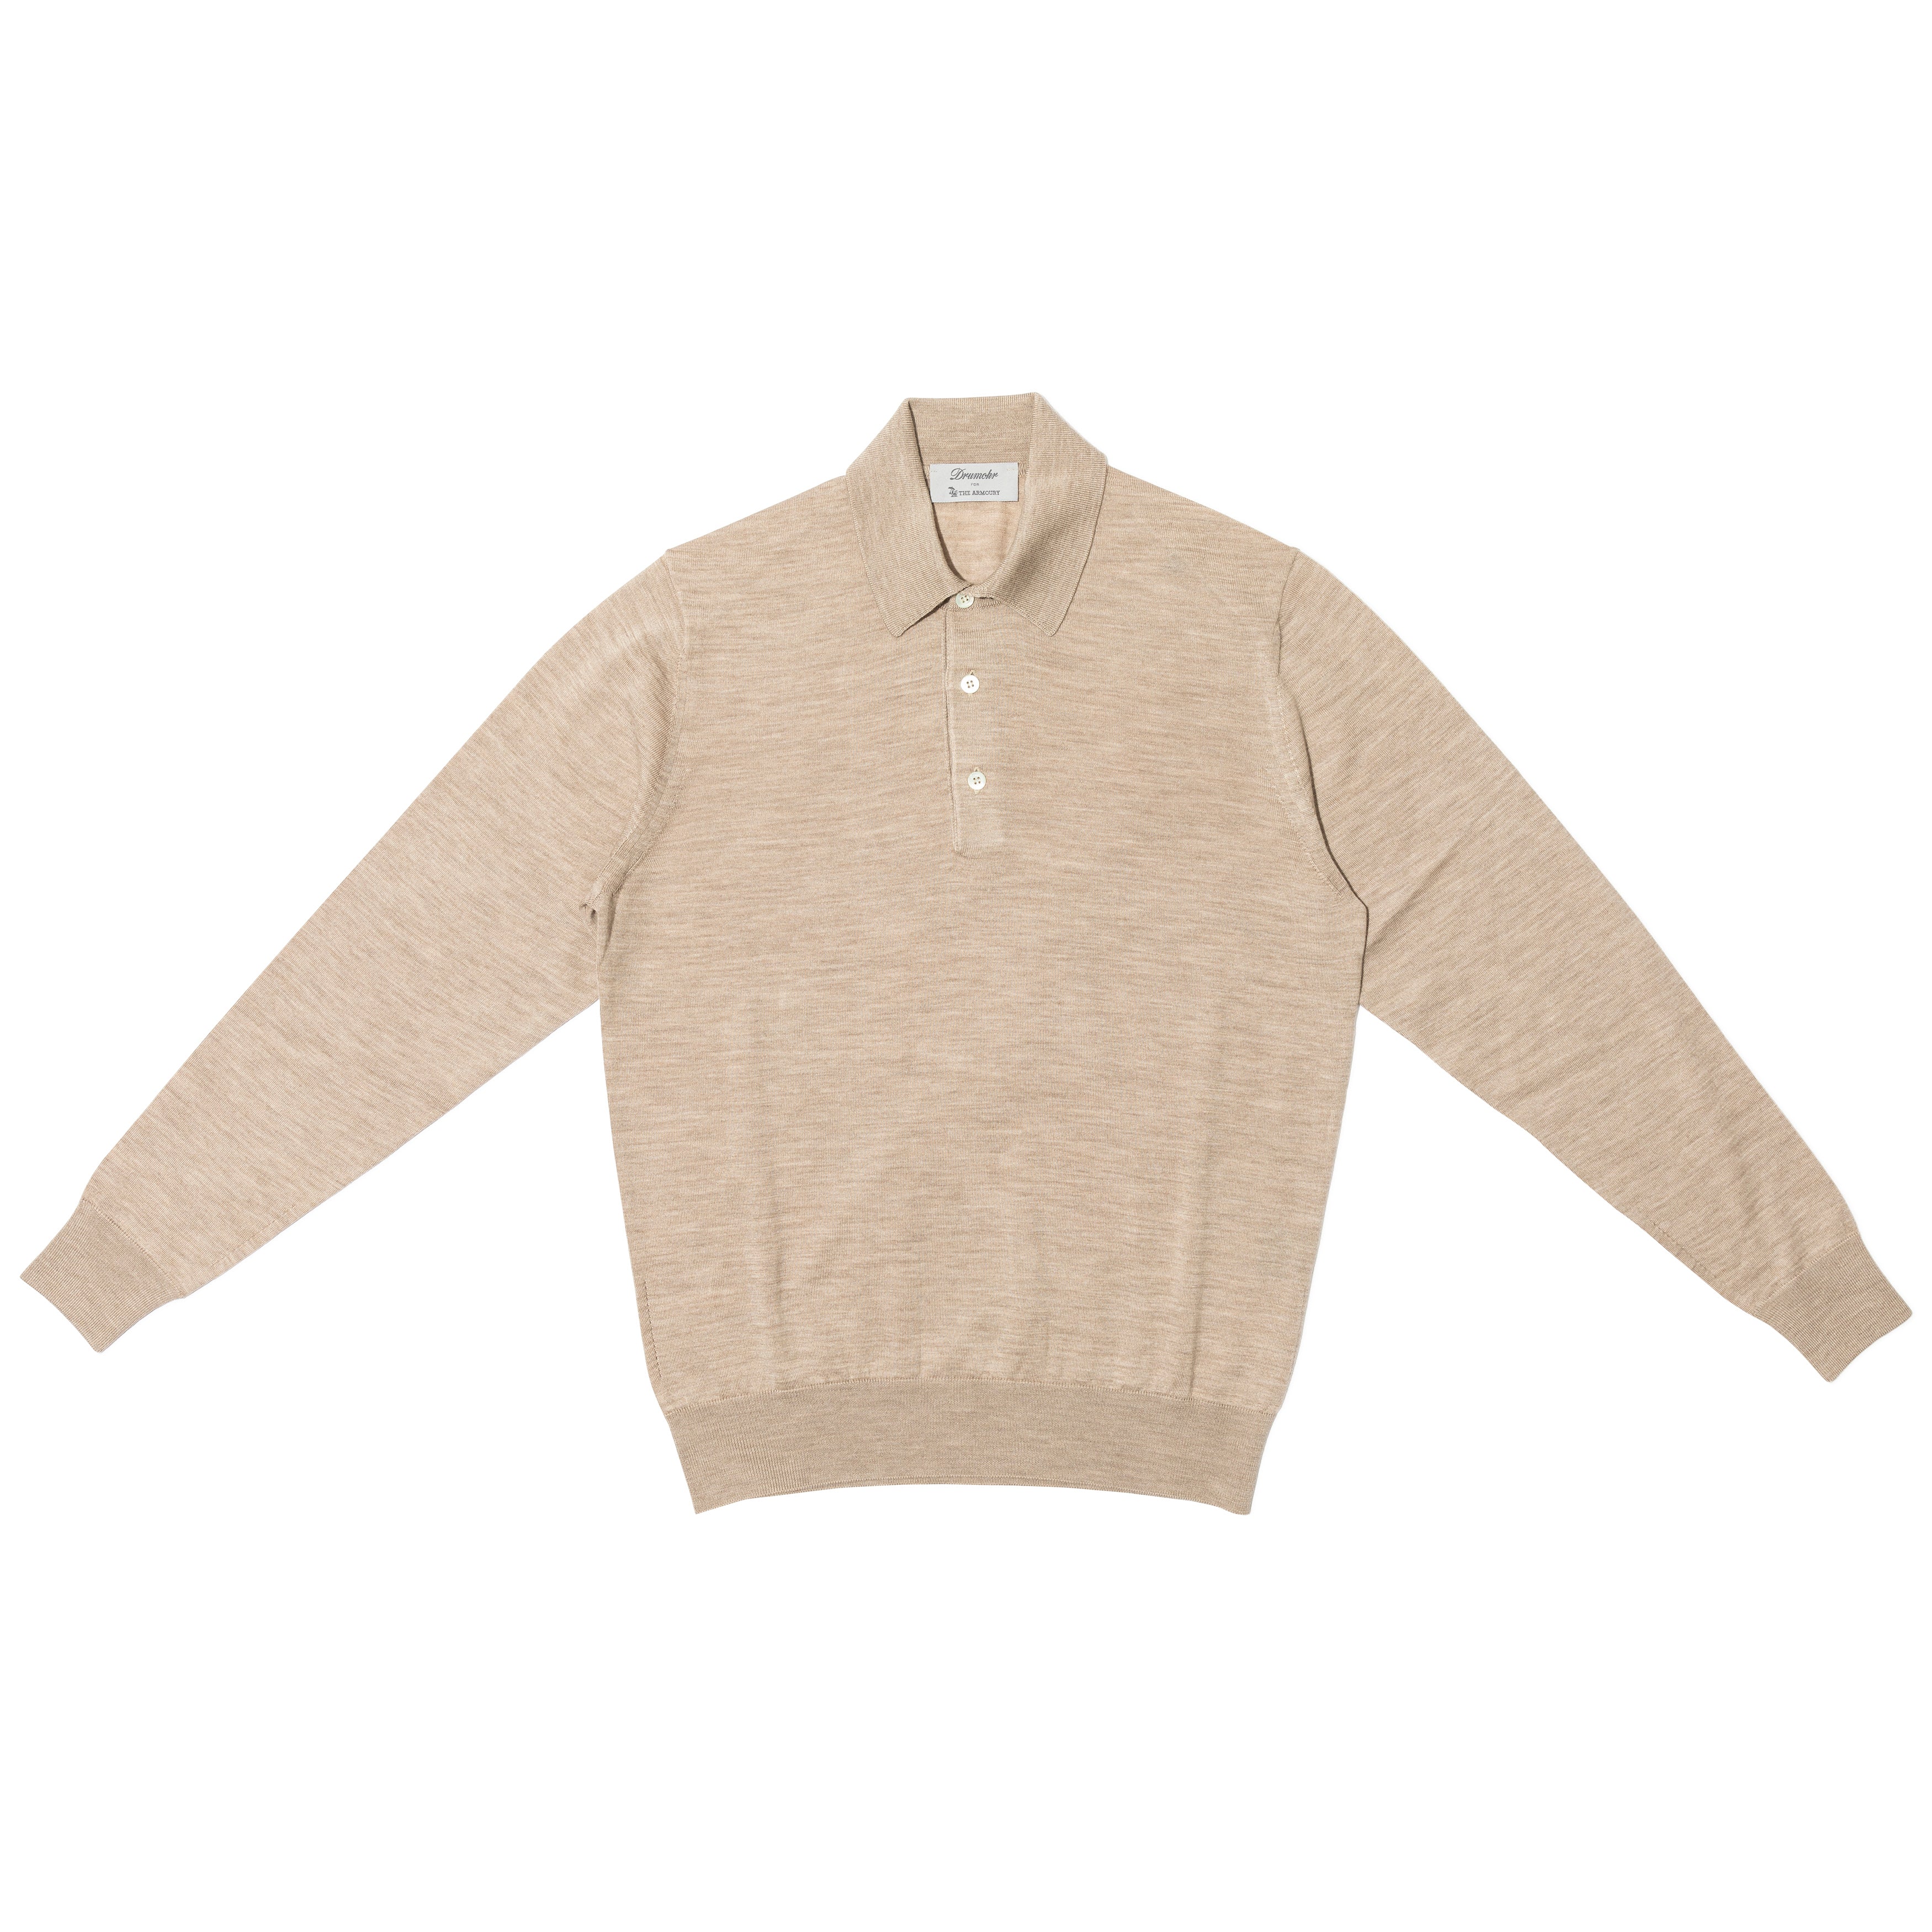 Wool/Silk/Cashmere Knit Polo - The Armoury